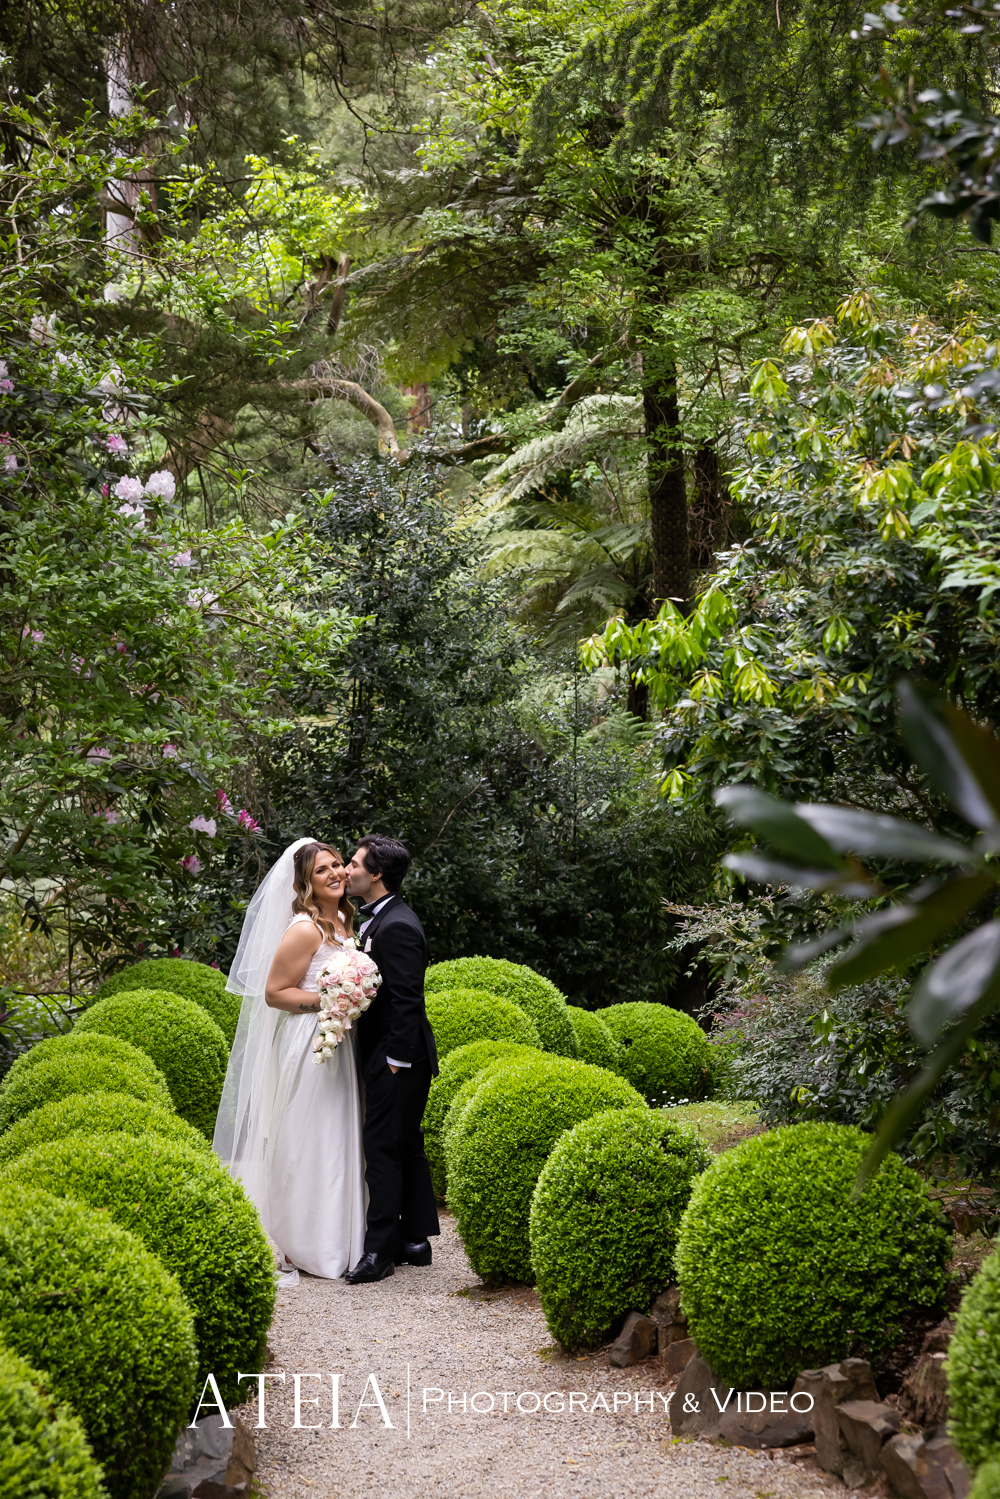 , Kailah and Aaron&#8217;s wedding photography at Tatra Receptions Mount Dandenong captured by ATEIA Photography &#038; Video